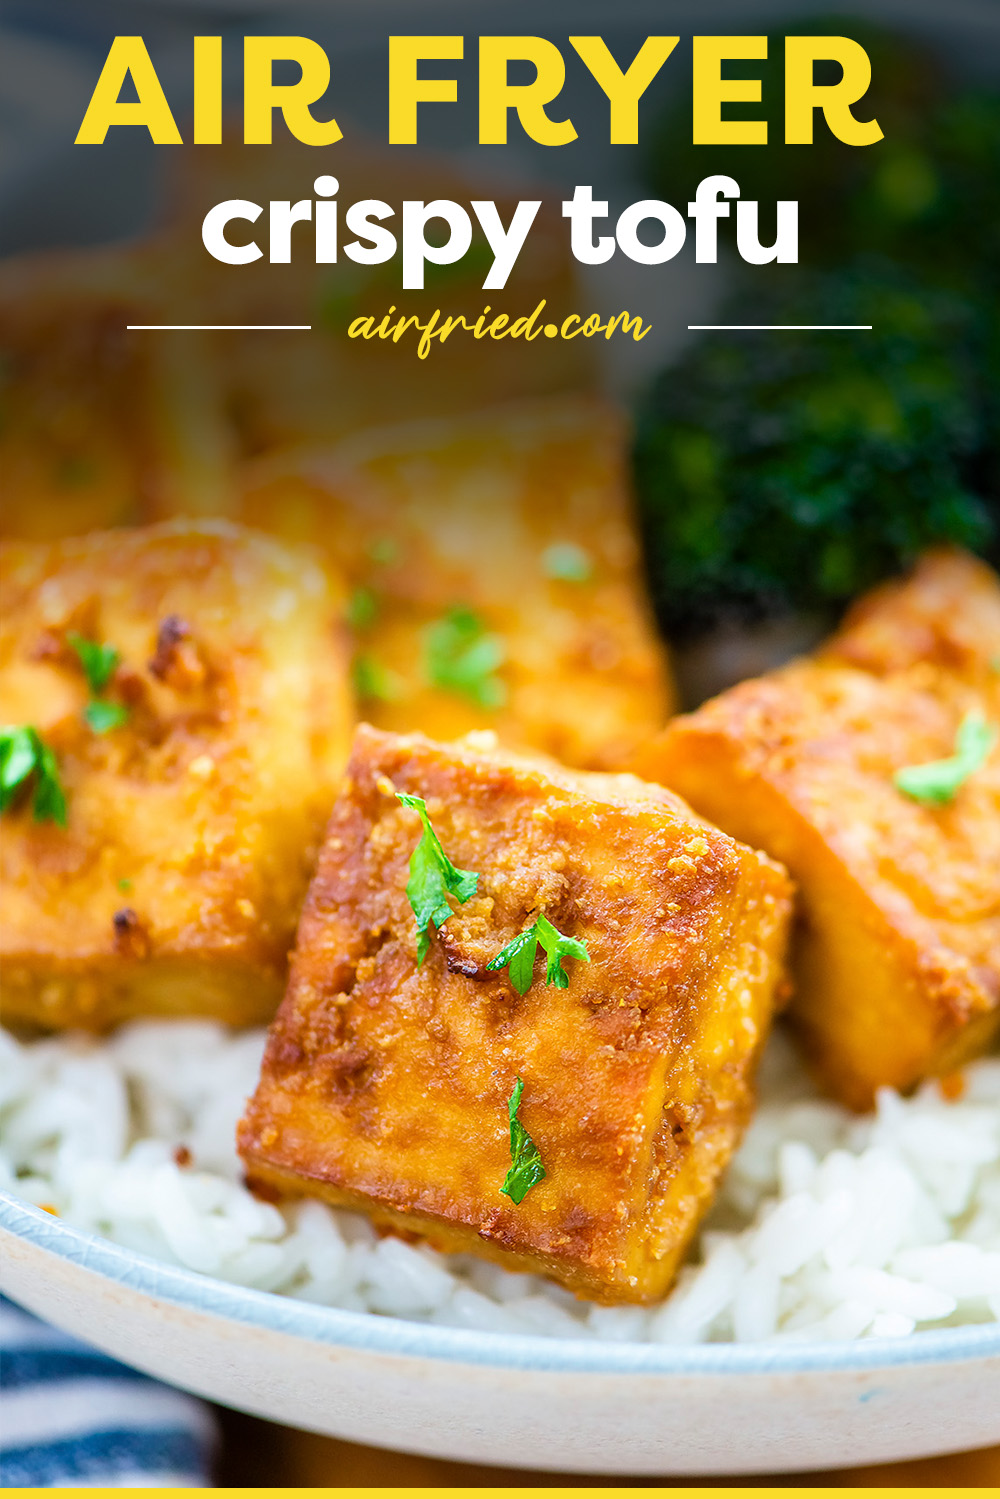 This crispy tofu was made in the air fryer!  It is super simple with a very light breading and some mild seasoning for a great taste!